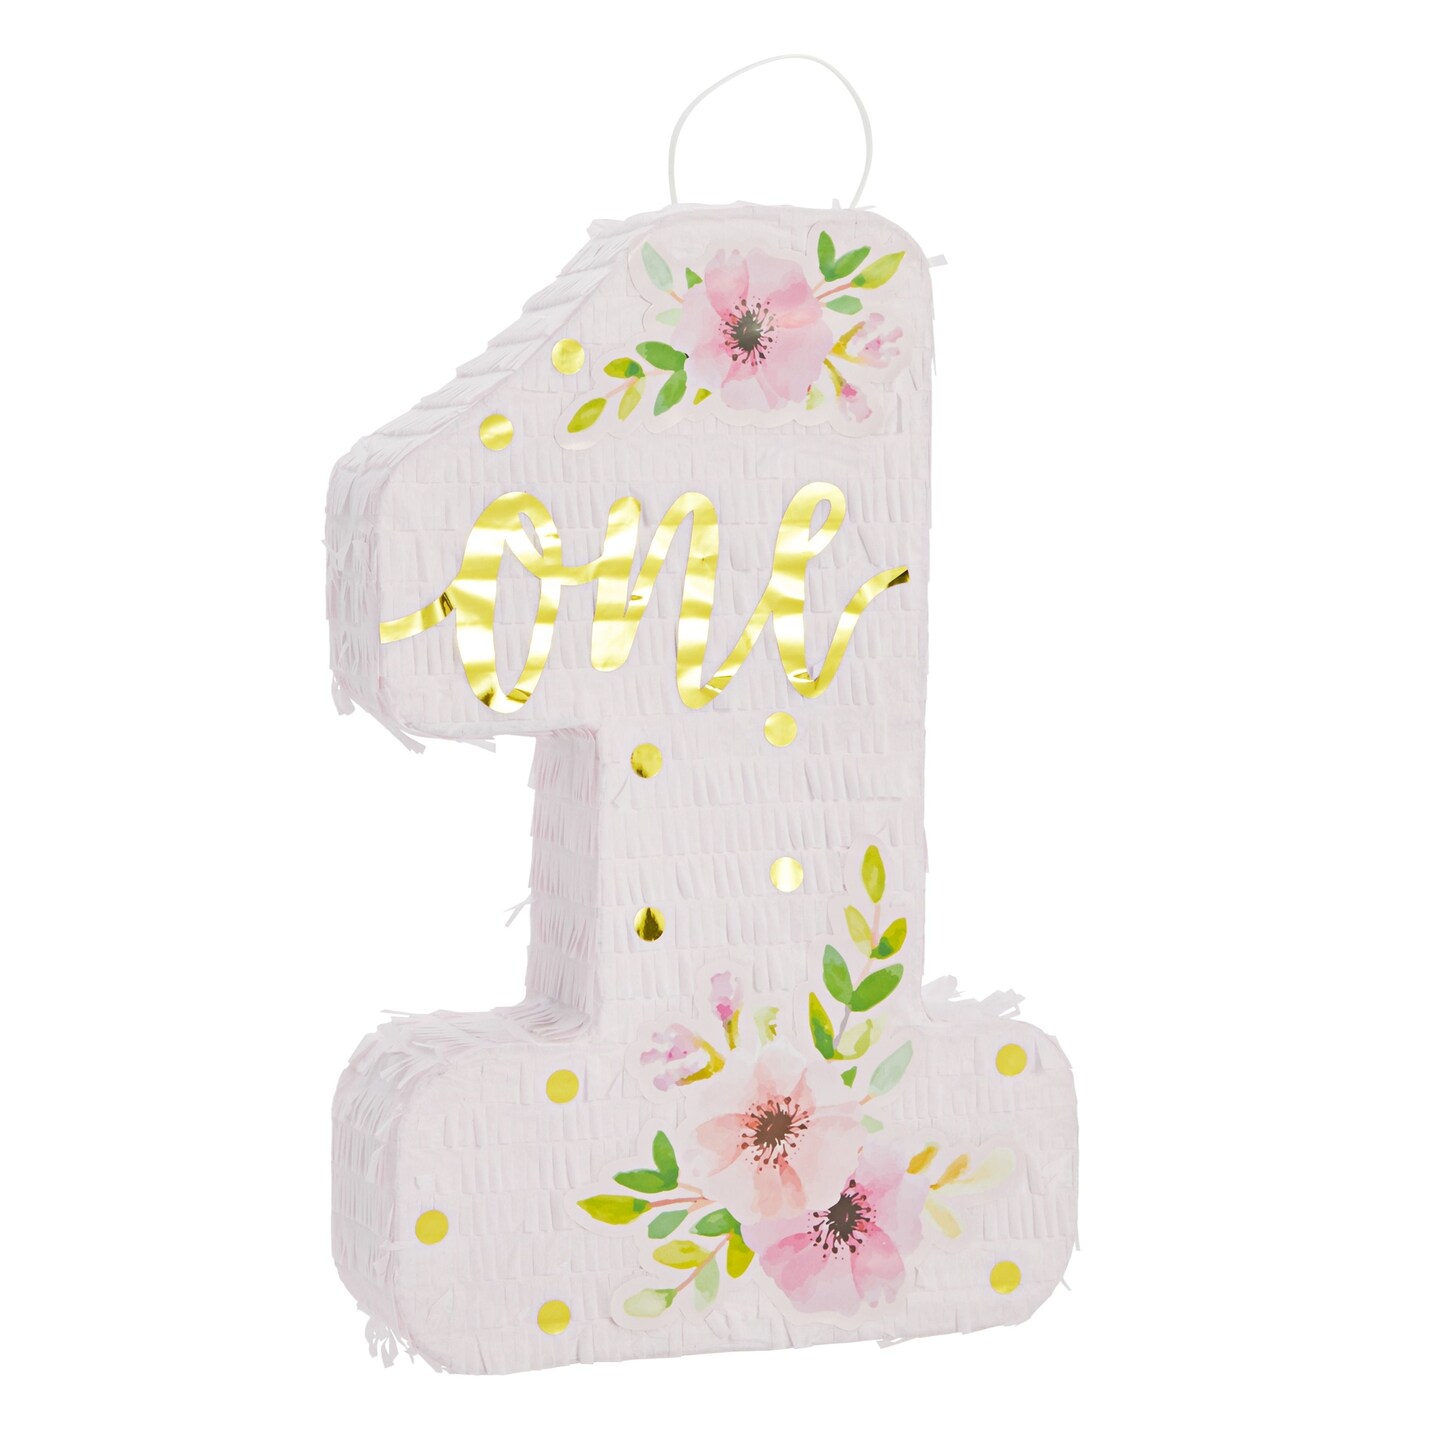 Small Pink Floral Number 1 Pinata for Girl&#x27;s 1st Birthday Party Decorations, Table Centerpieces, Gold Foil &#x22;One&#x22; and Hibiscus Floral Print Designs (11x17x3 in)